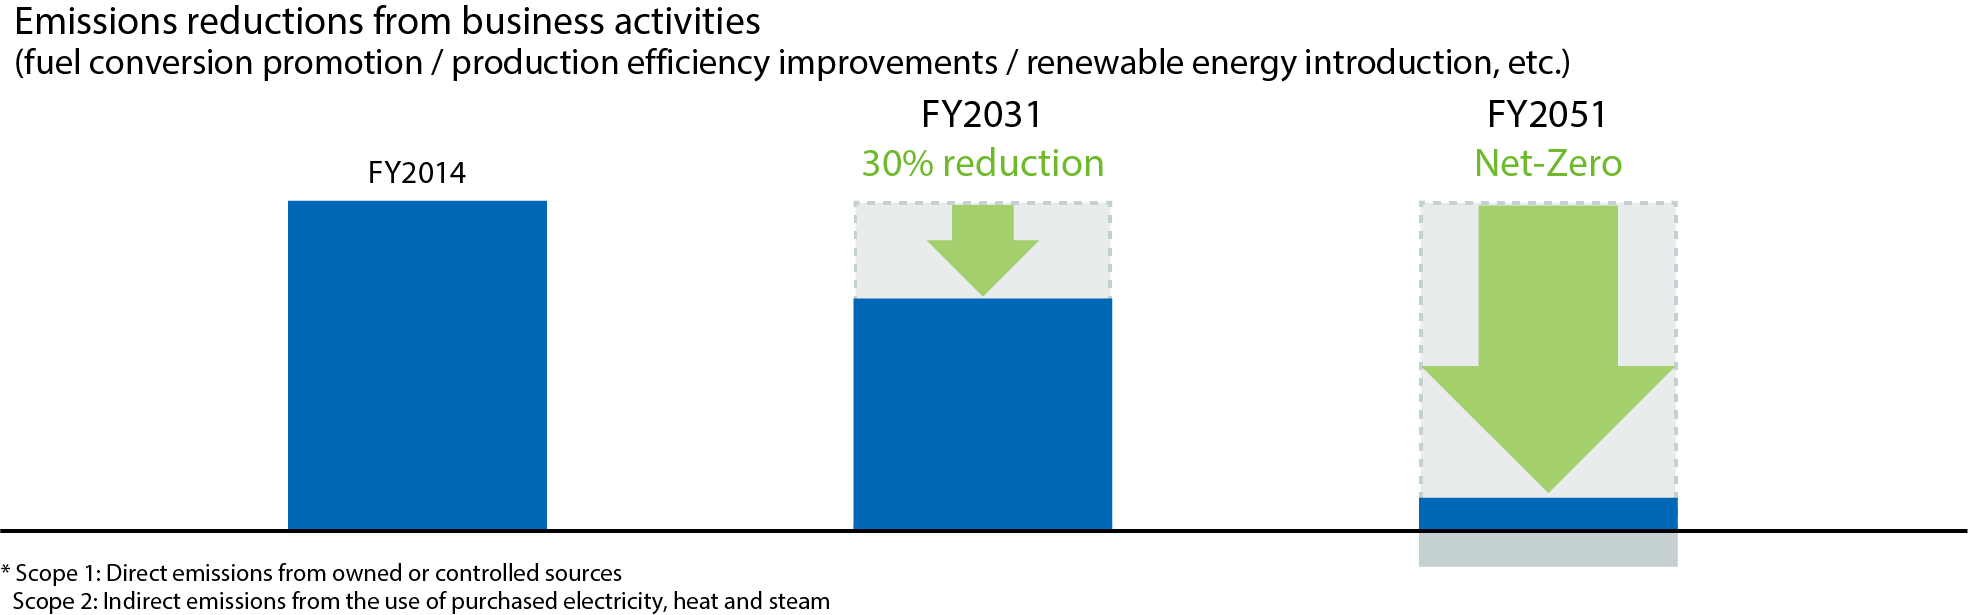 Reduction of Emissions from Business Activities